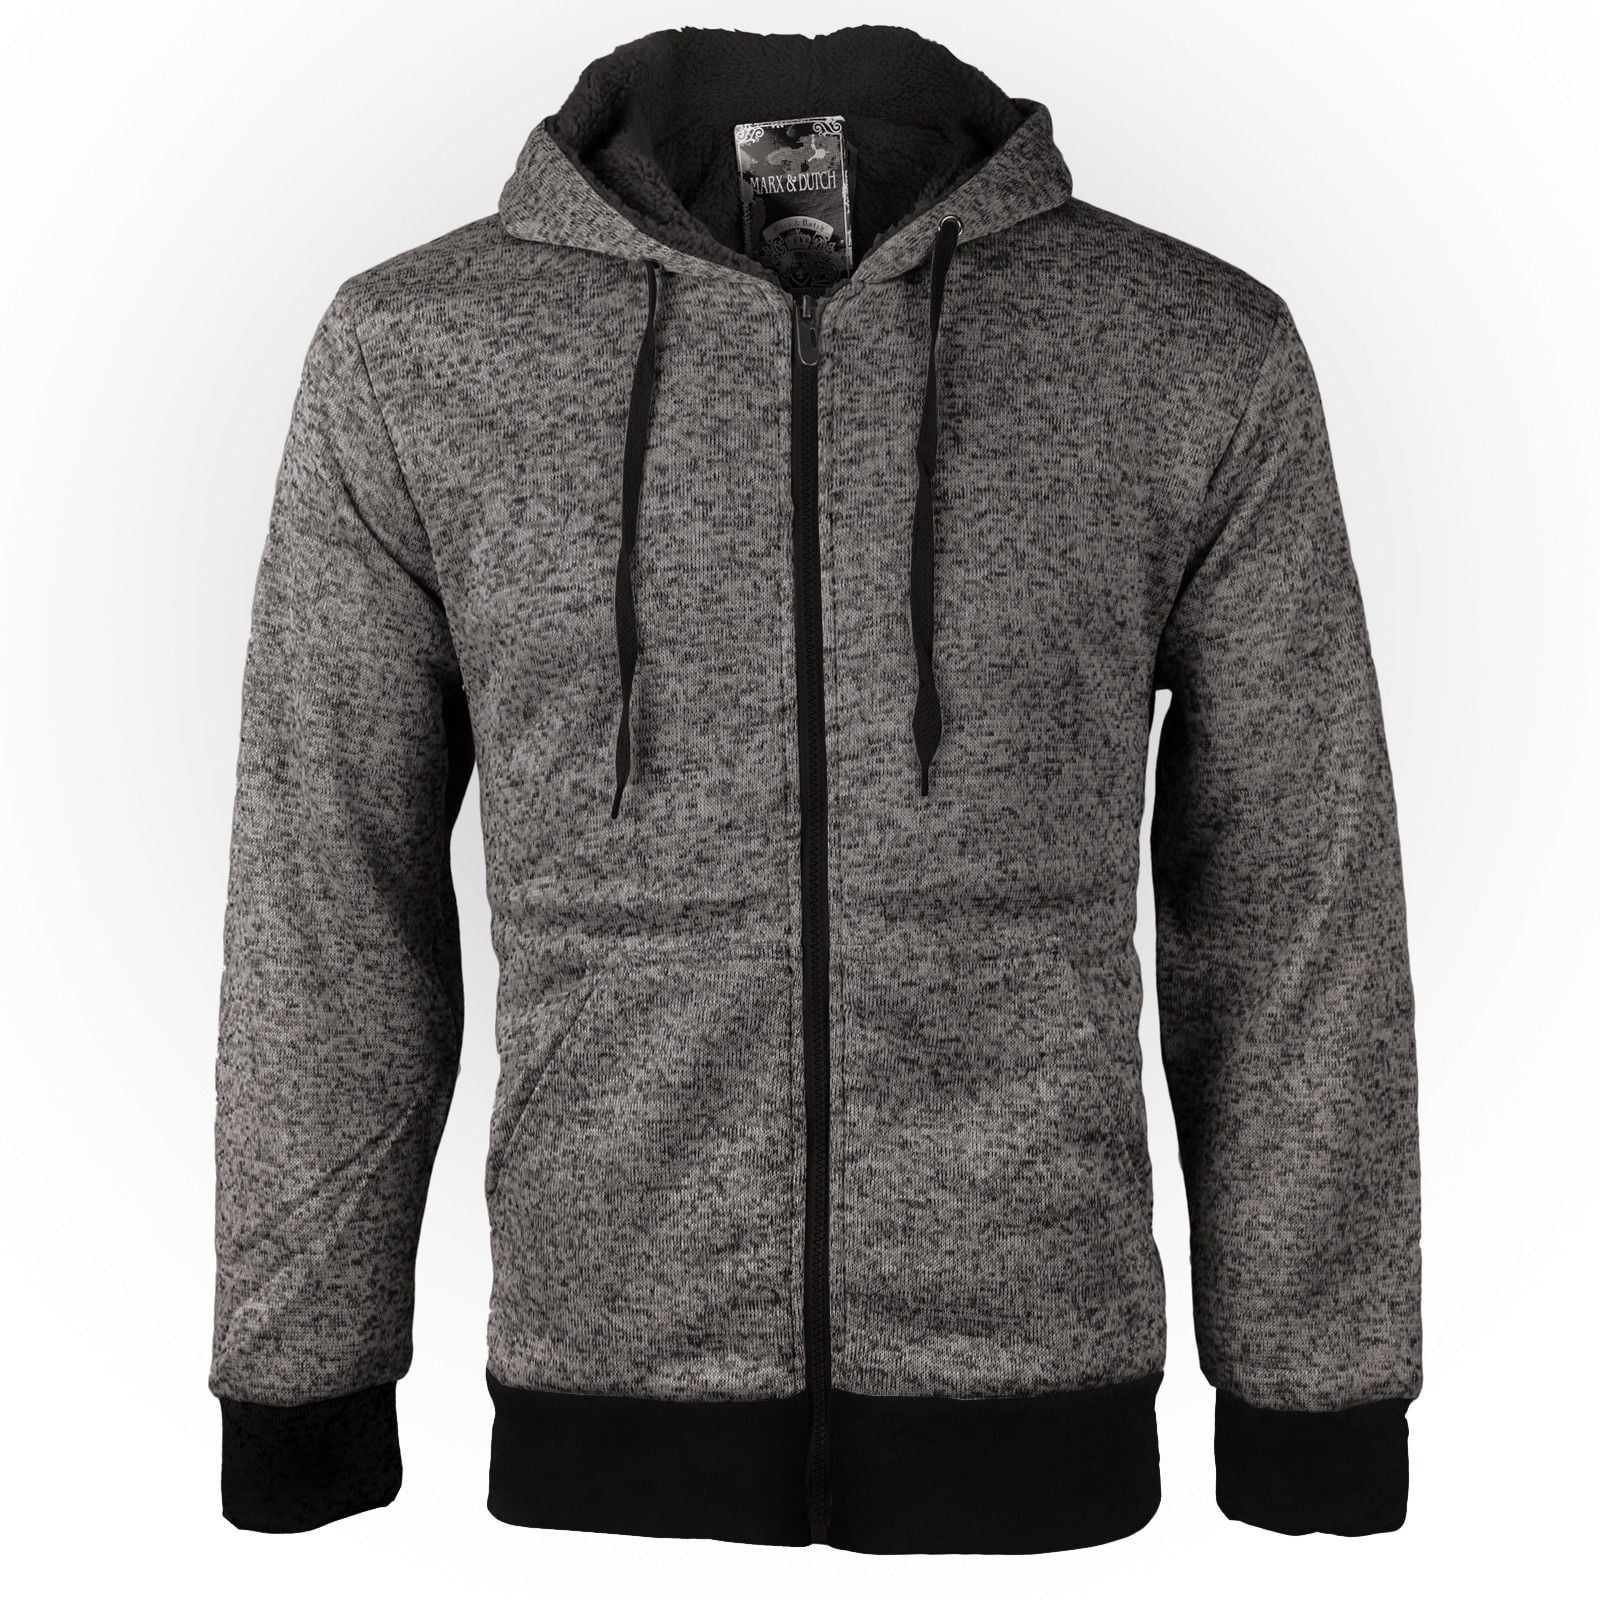 Men's Premium Athletic Soft Sherpa Lined Fleece UP Hoodie Coat Sweater Pullover. 